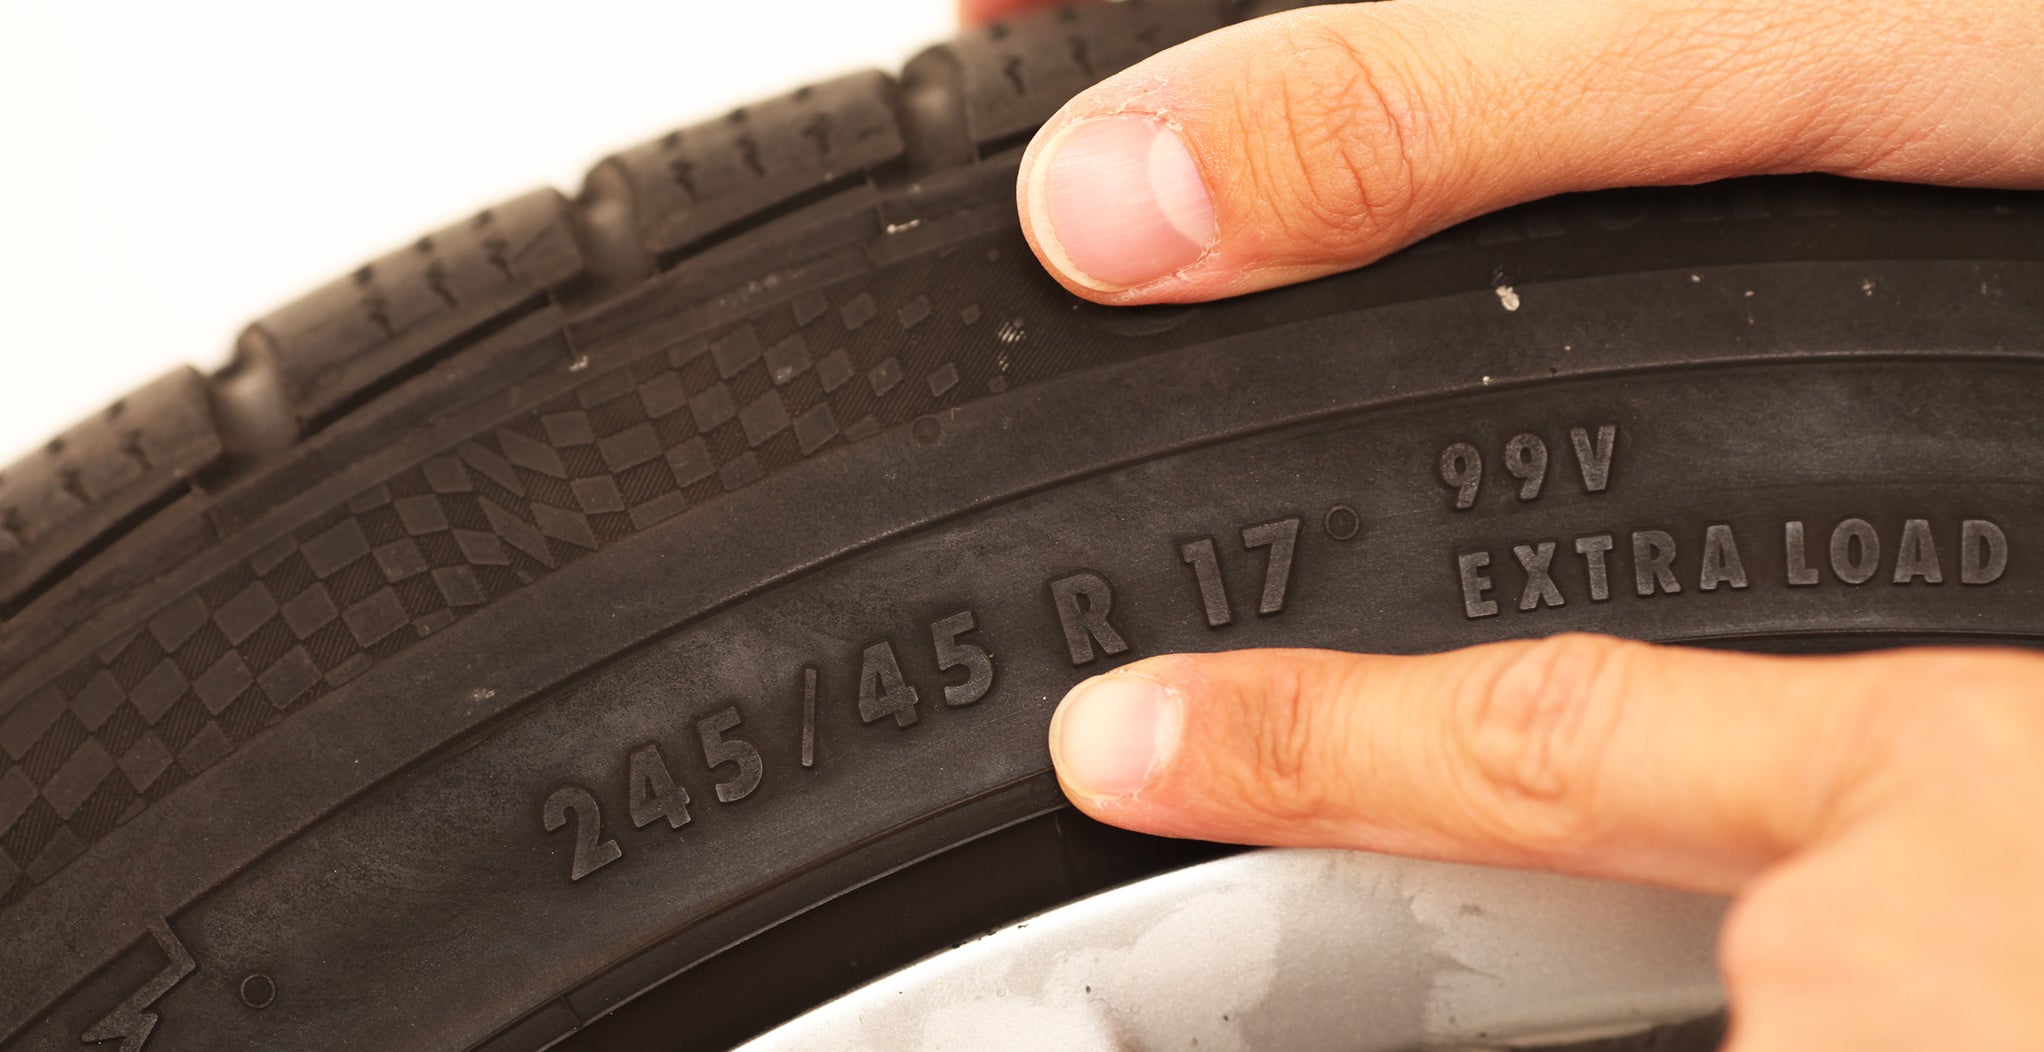 Buying Tires Guide: What Do the Tire Numbers Mean?